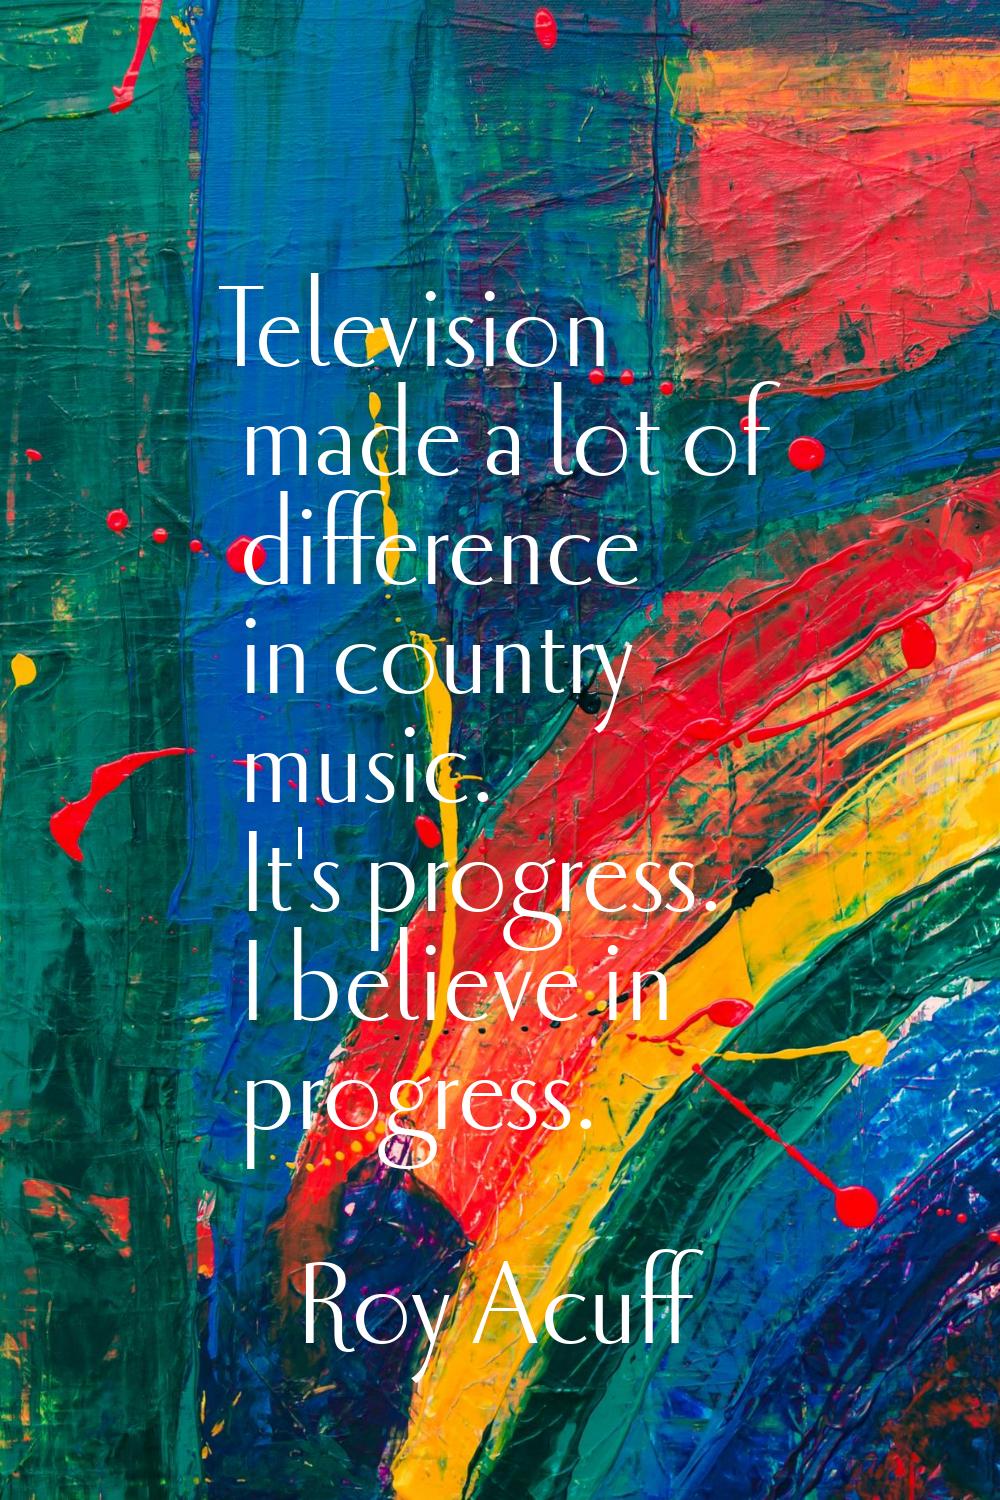 Television made a lot of difference in country music. It's progress. I believe in progress.